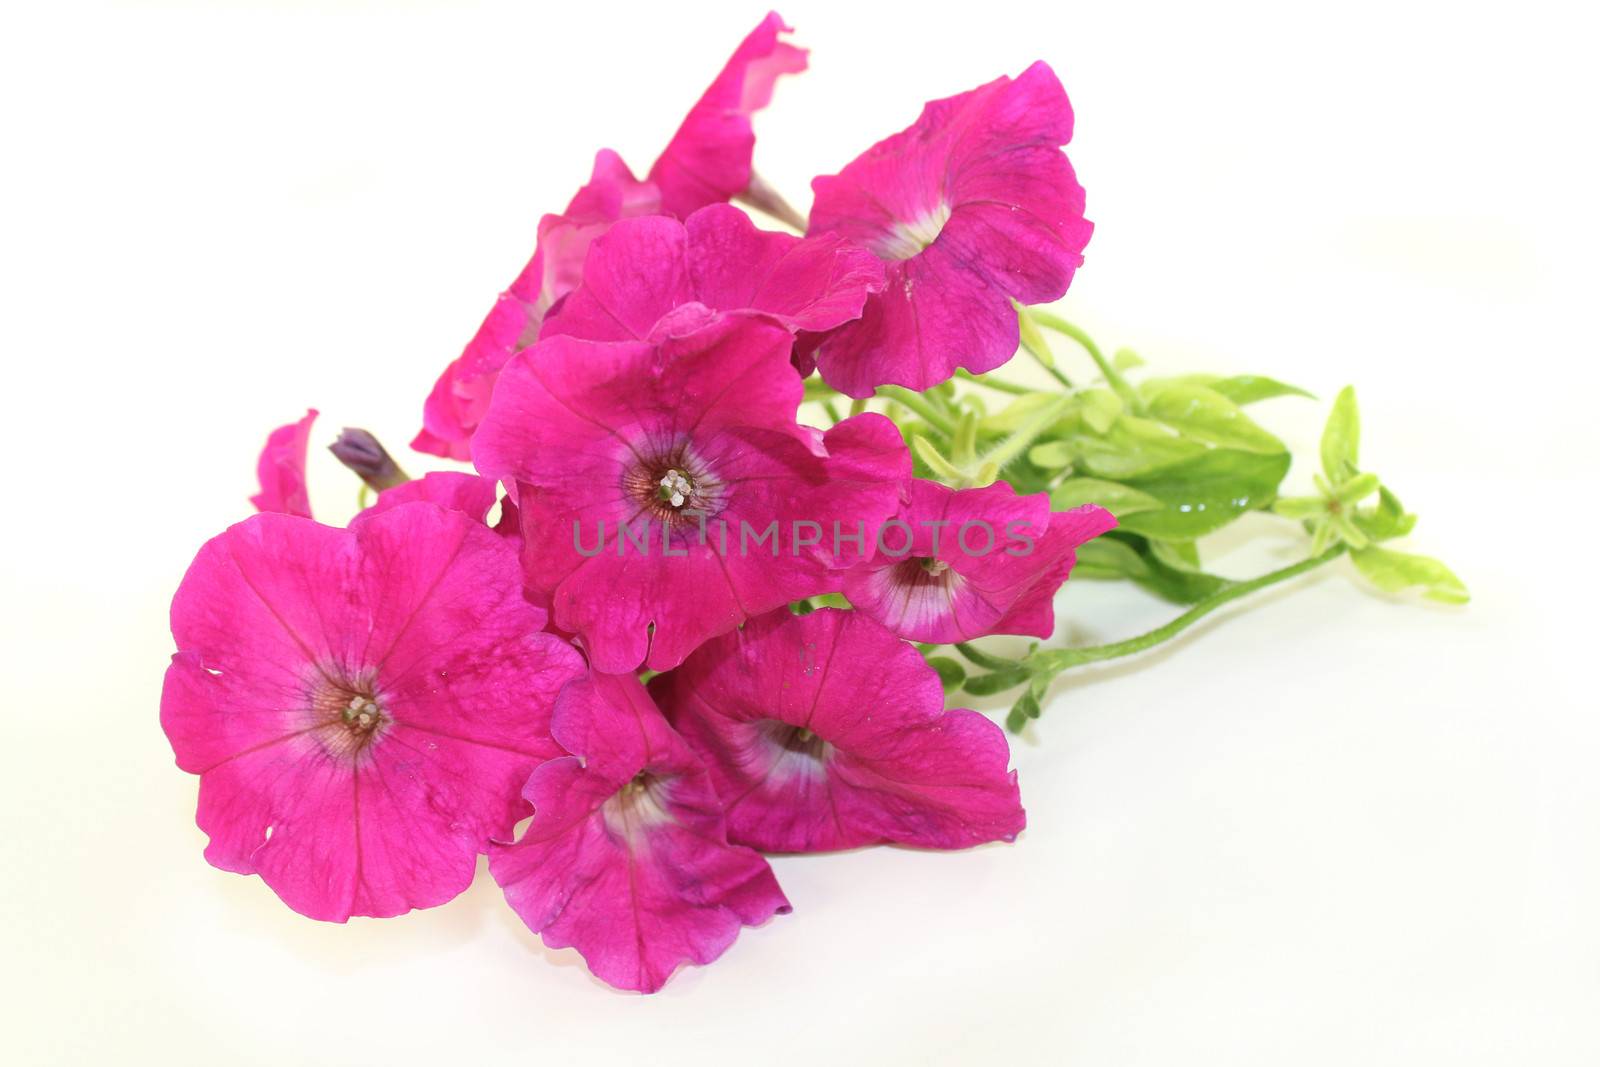 Petunia flowers and leaves against a white background